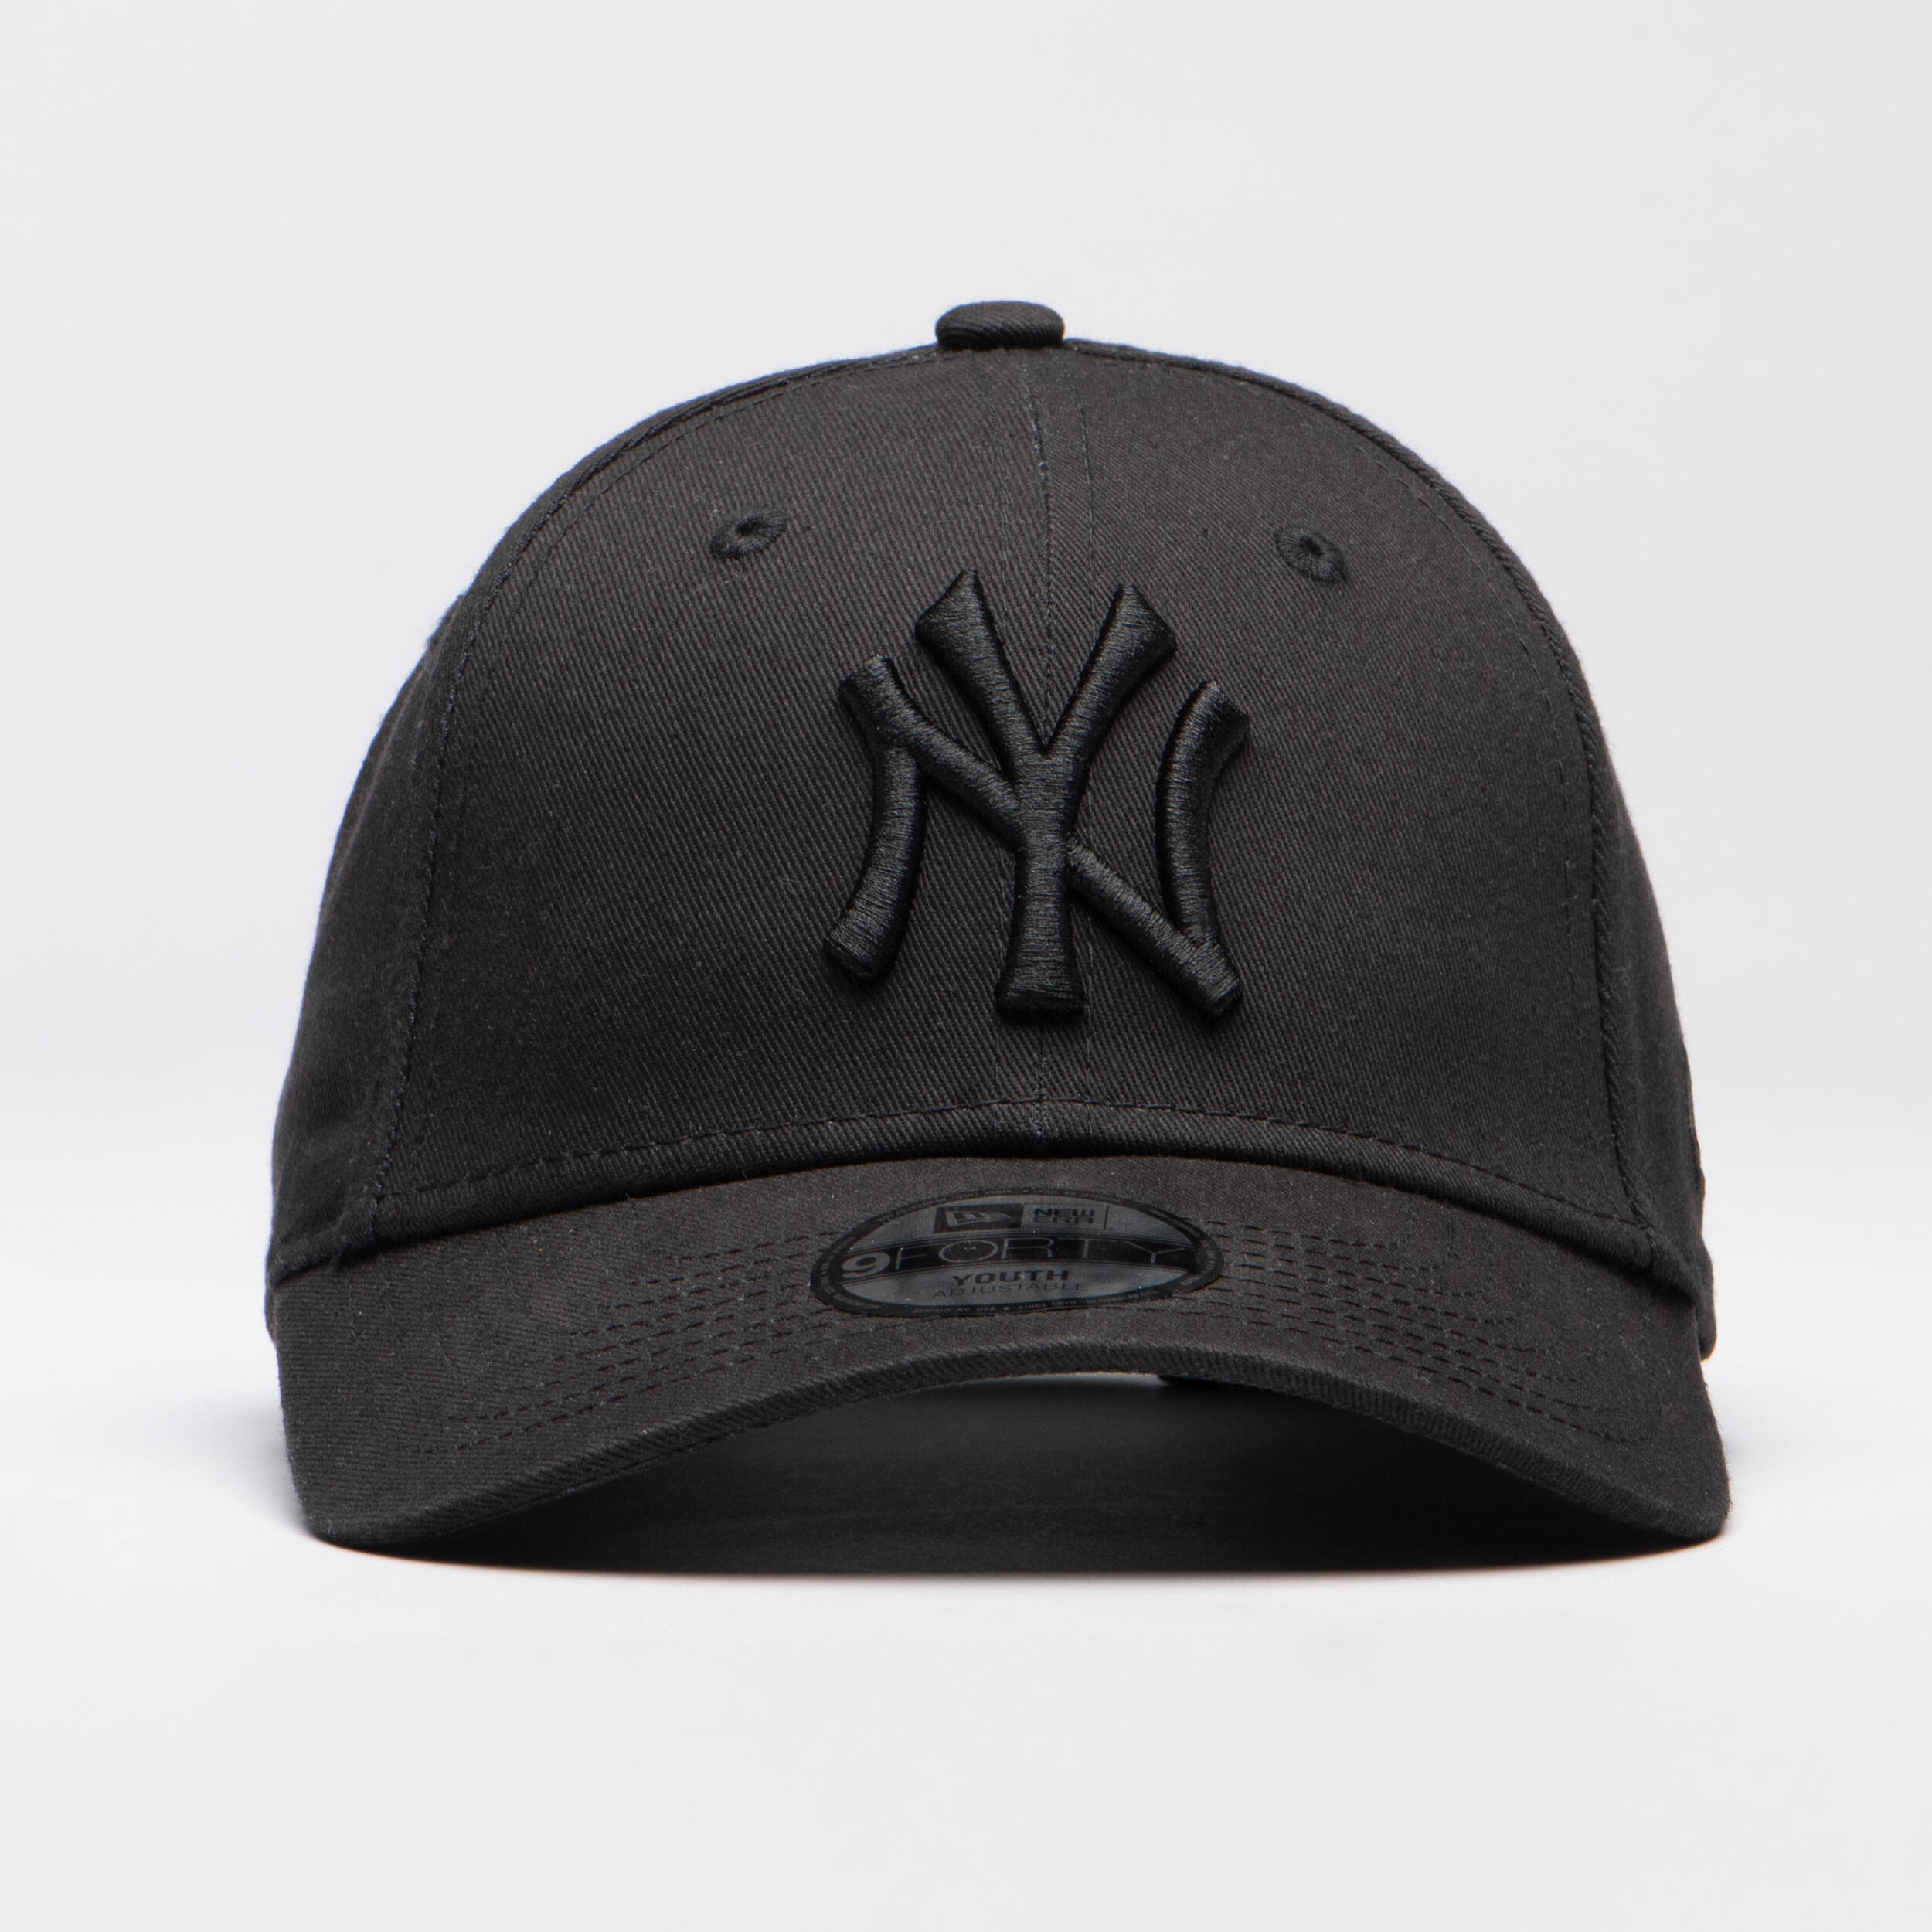 New York Yankees MLB Cap Black Mens Fashion Watches  Accessories Caps   Hats on Carousell